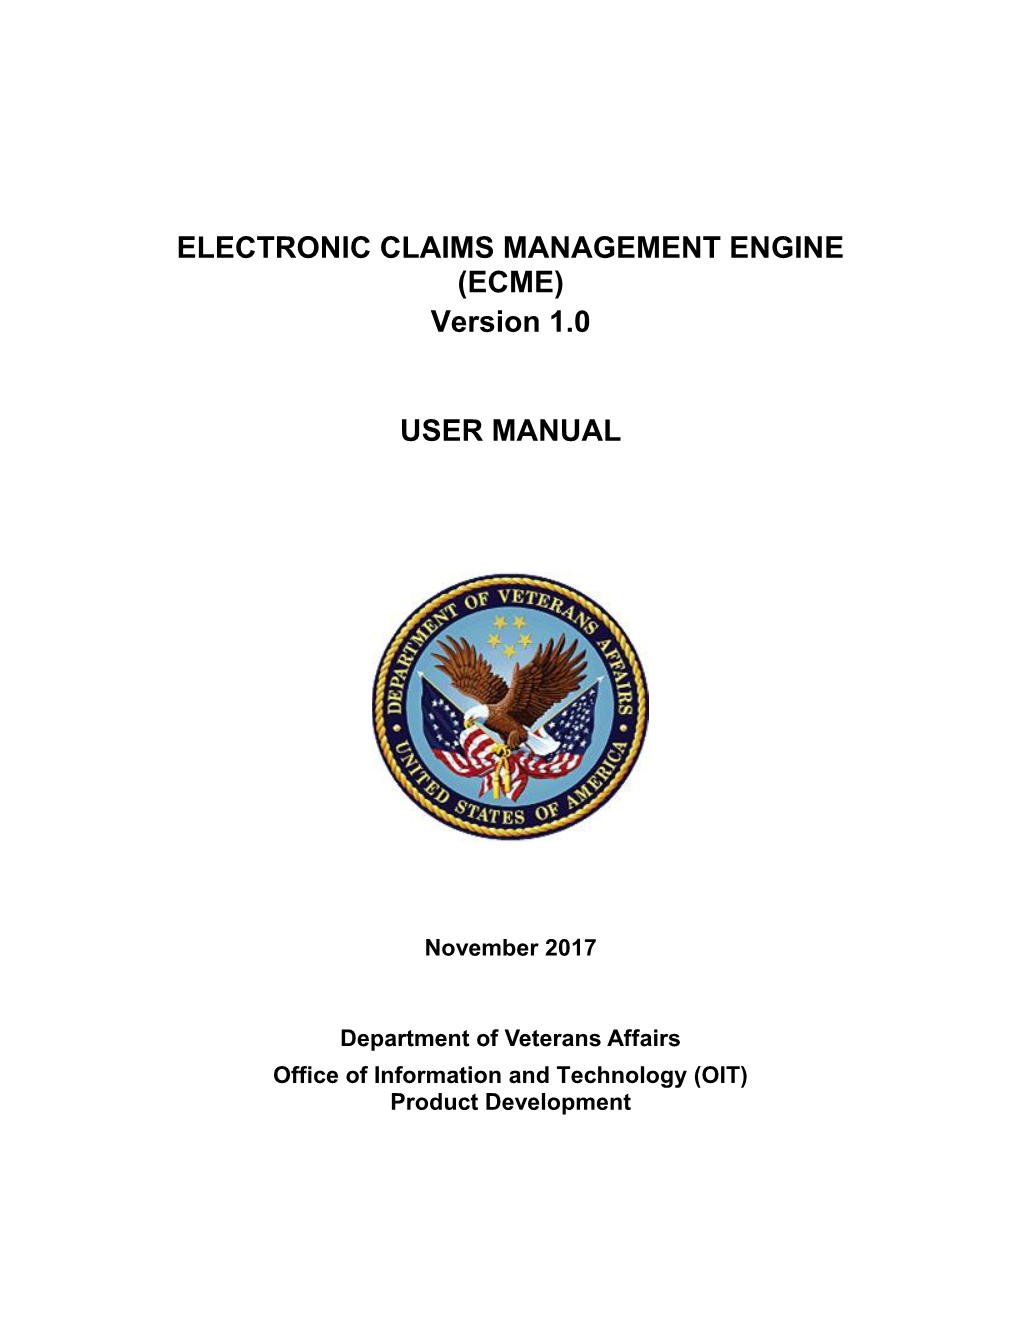 Department of Veterans Affairs Electronic Claims Management Engine (ECME) User Manual V.1